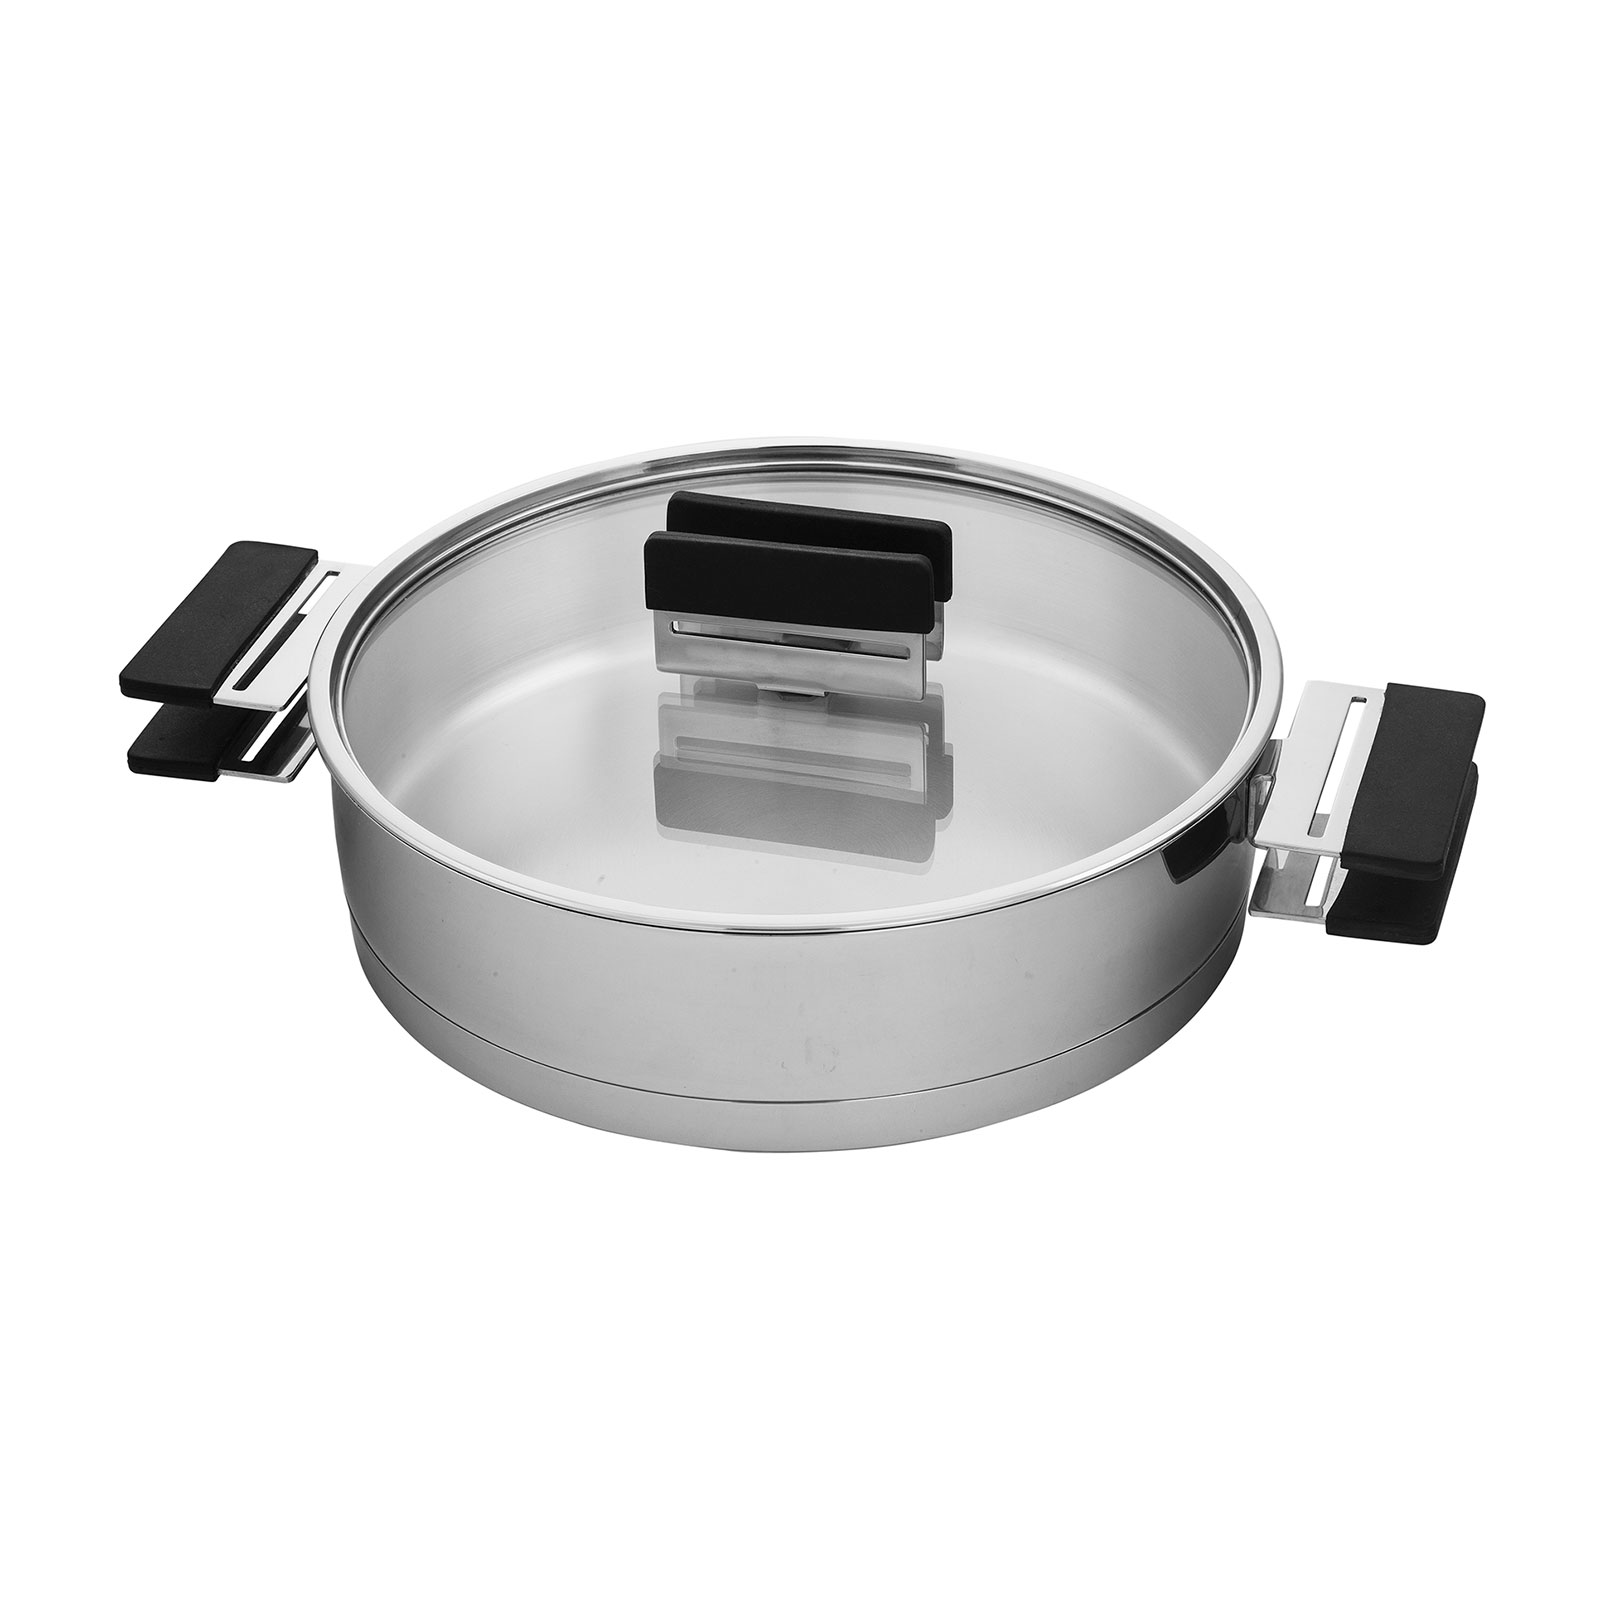 Walco Stainless WIR26 Induction Chafing Dish